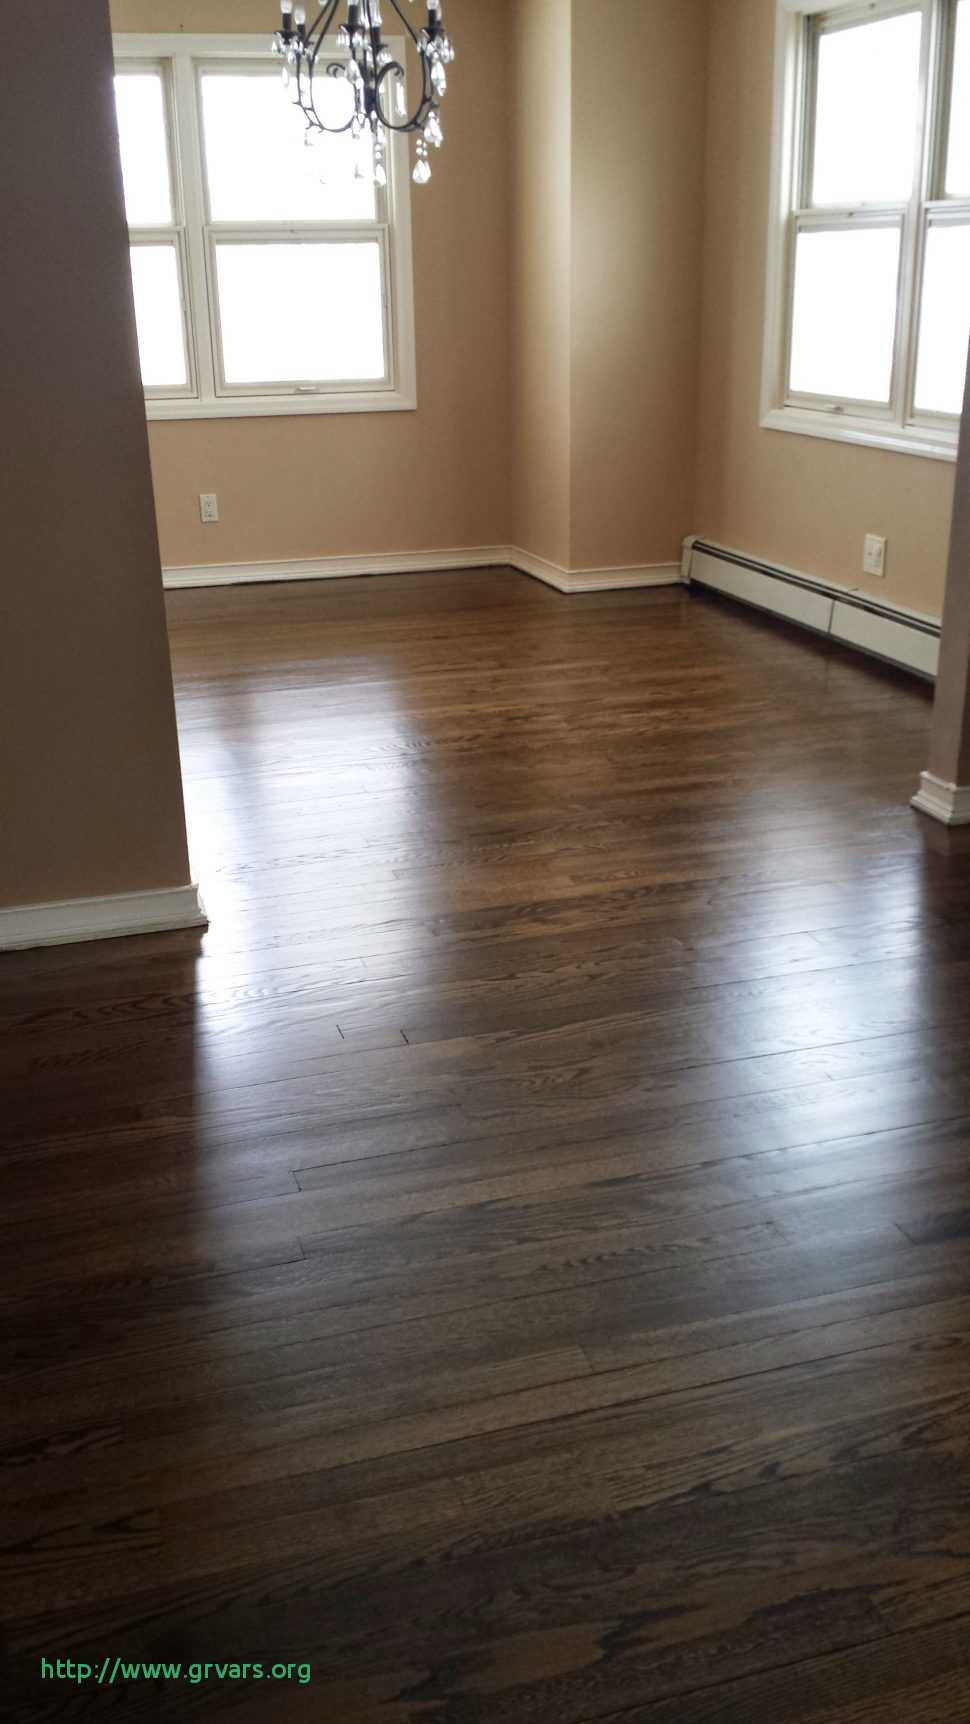 16 Perfect How Much Does It Cost to Refinish Hardwood Floors Myself 2024 free download how much does it cost to refinish hardwood floors myself of how much does it cost to have hardwood floors refinished frais with regard to how much does it cost to have hardwood floors refini